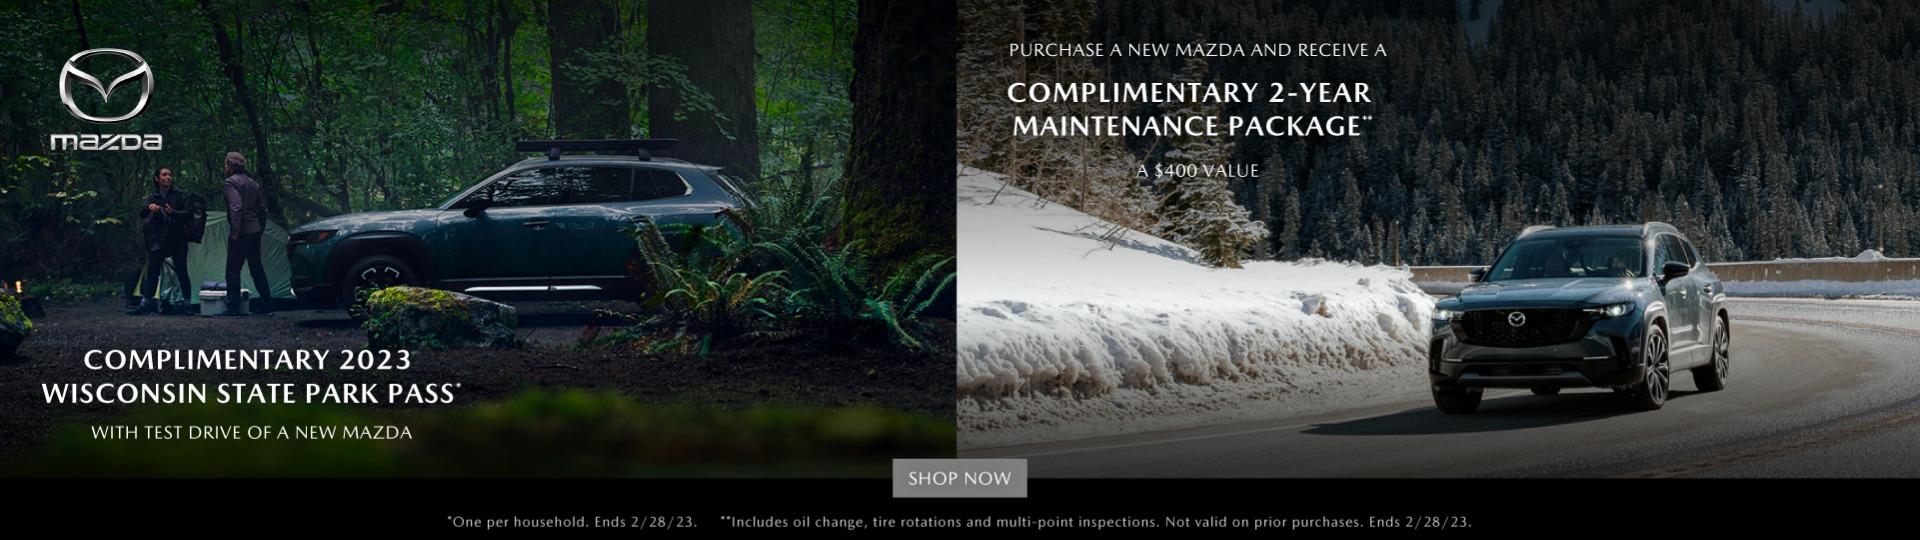 Complimentary 2023 Wisconsin state park pass with test drive of a new Mazda. Purchase a new Mazda and receive a complimentary 2 year maintenance package.